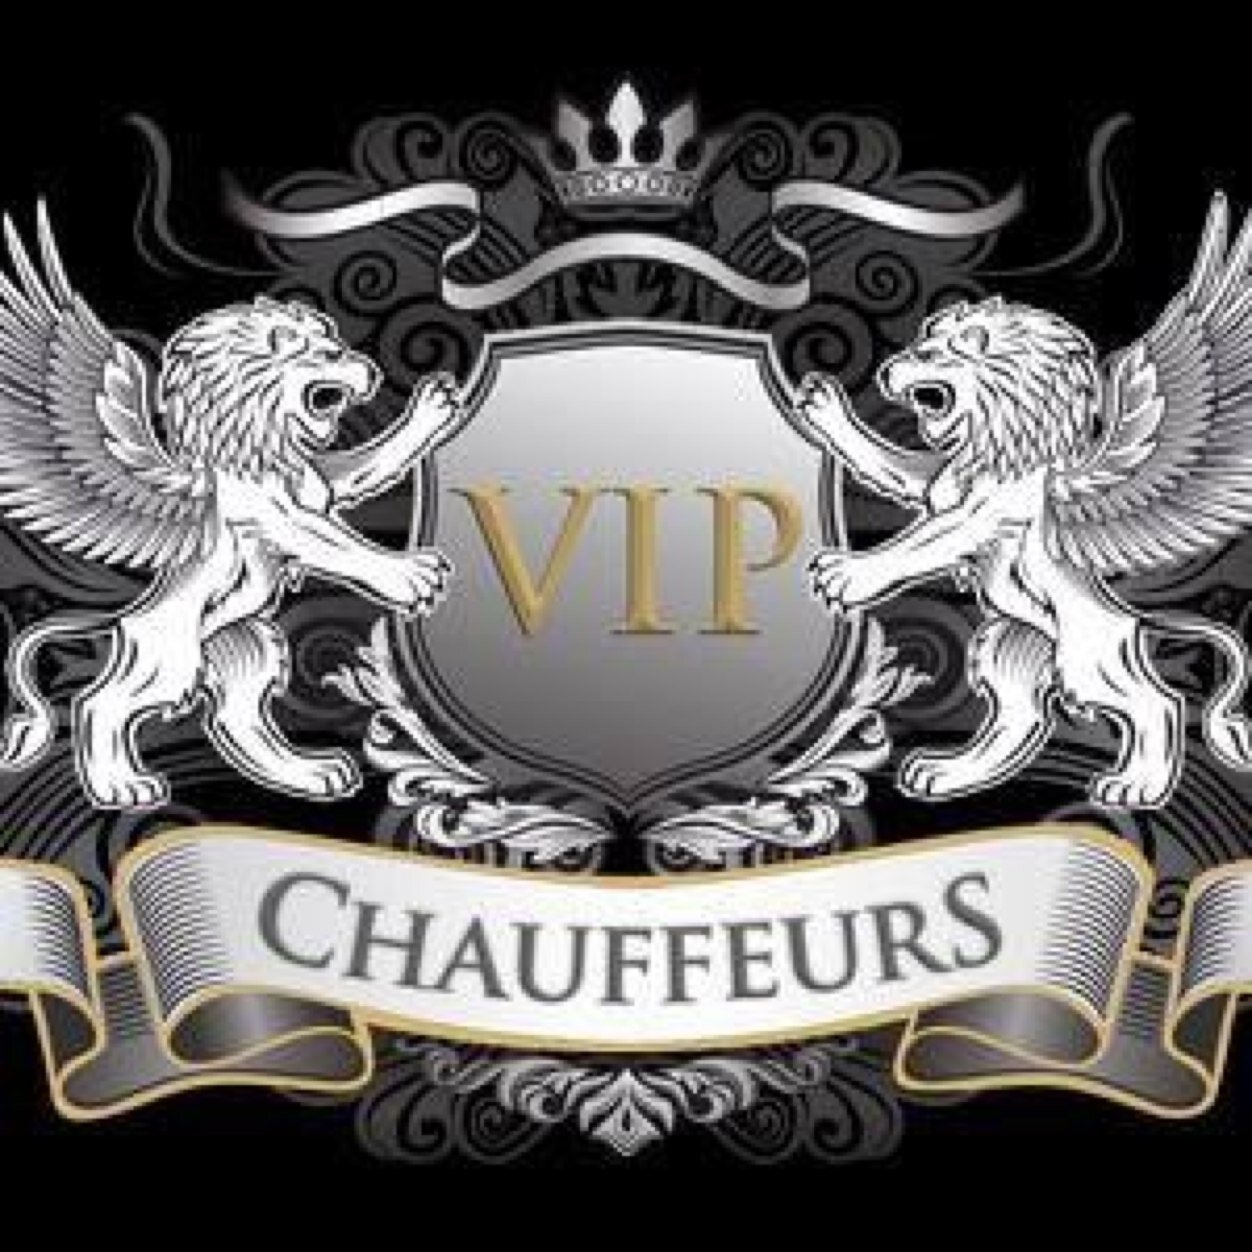 Airport transfers nights out anything you need to make travel for your special day or night out complete in a luxury range rover sport v8  message for details